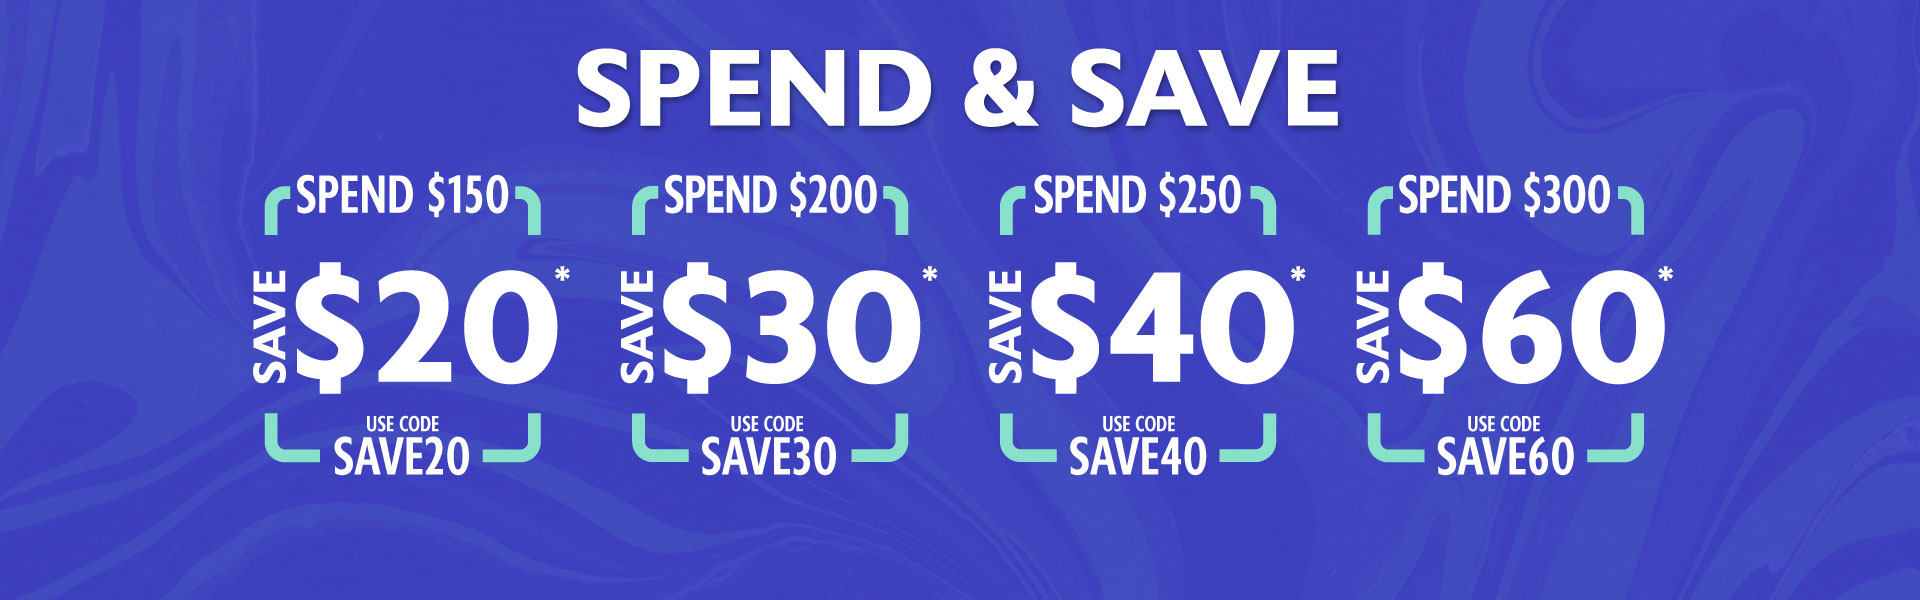 Sportitude Spend & save up to $60 OFF with discount codes on shoes, clothing & more